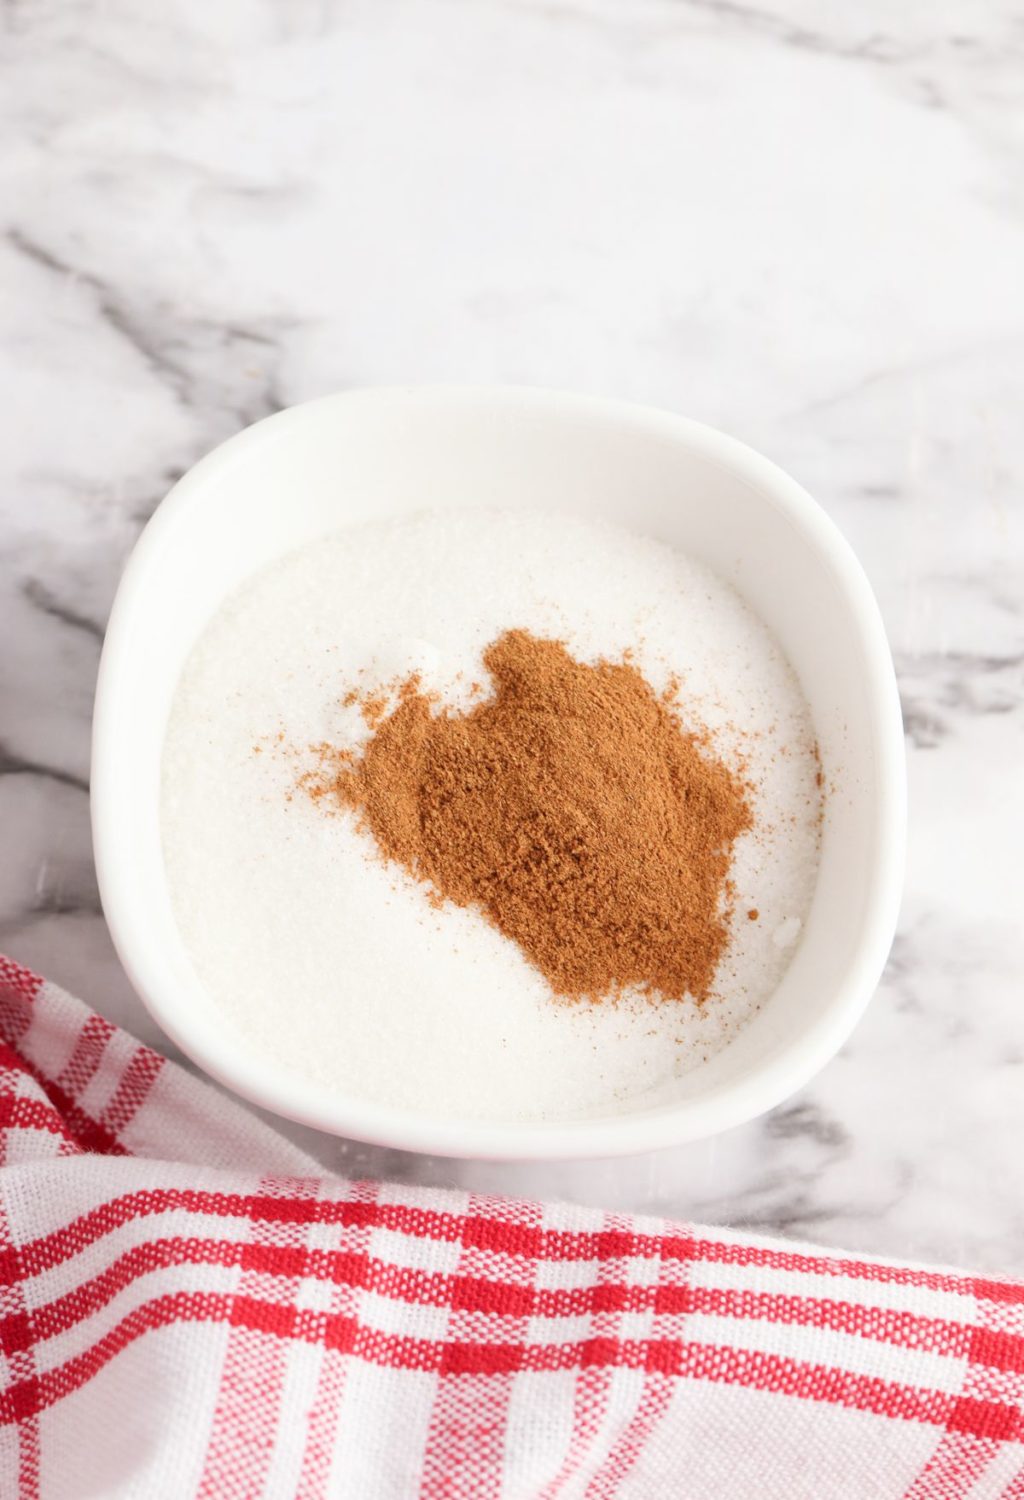 Cinnamon powder in a white bowl on a marble table.